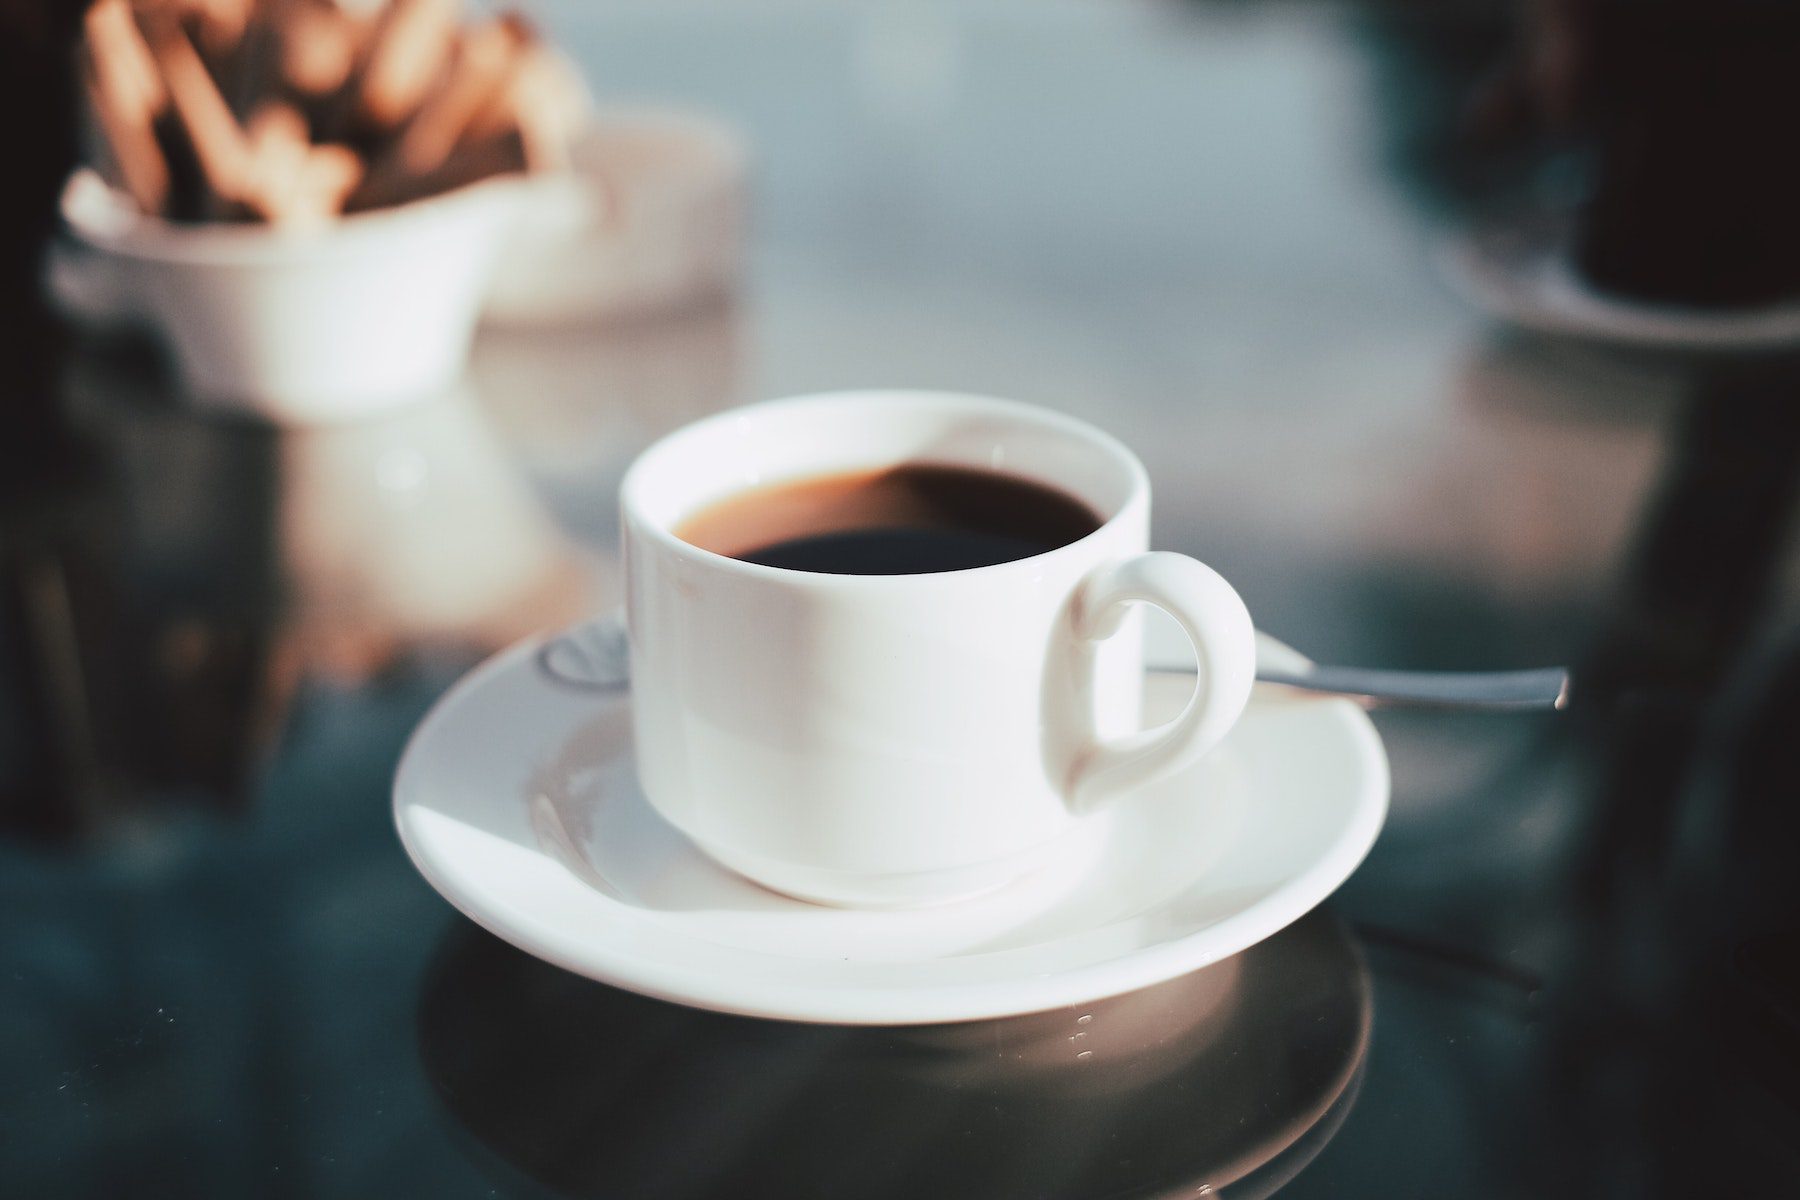 Coffee in small white ceramic cup on saucer with background blurred.